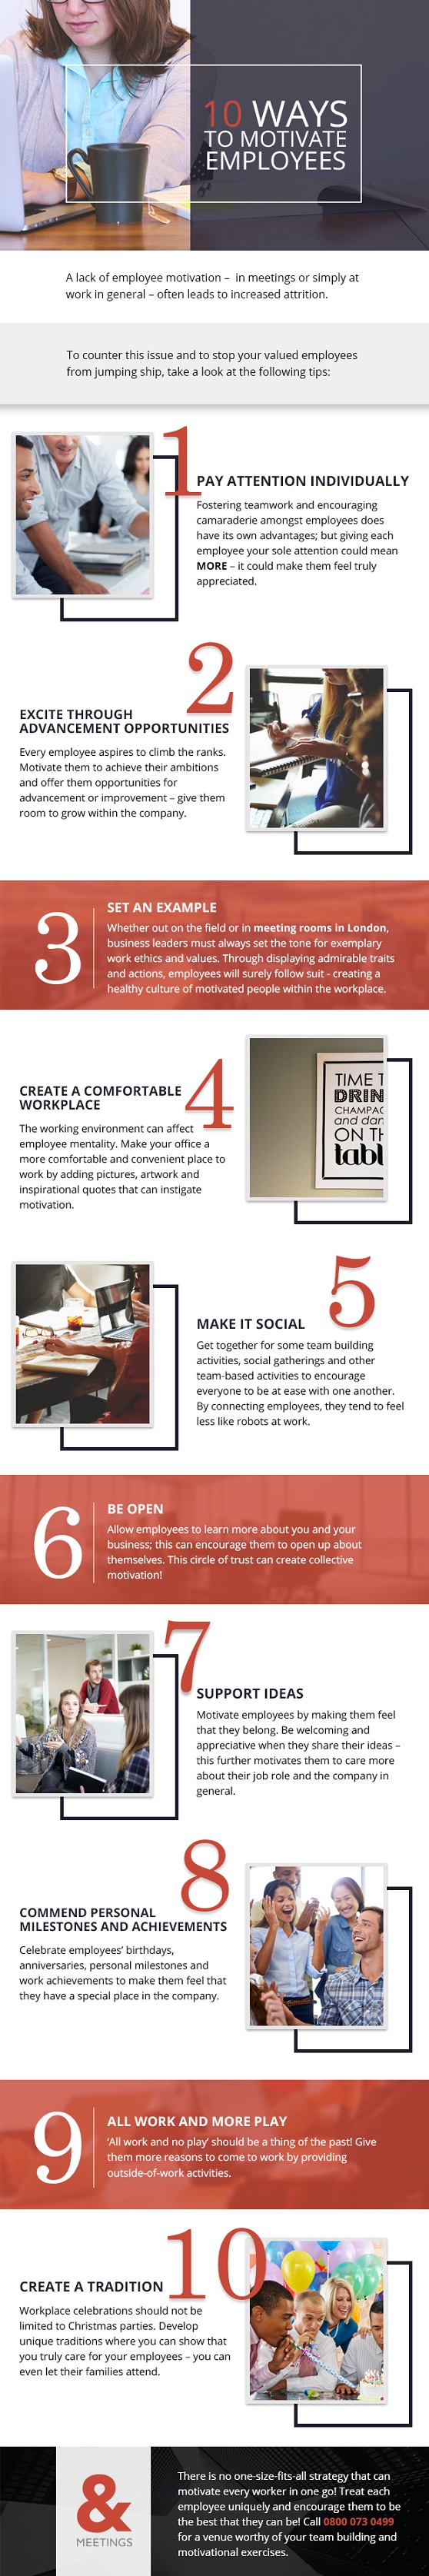 10 ways to motivate employees